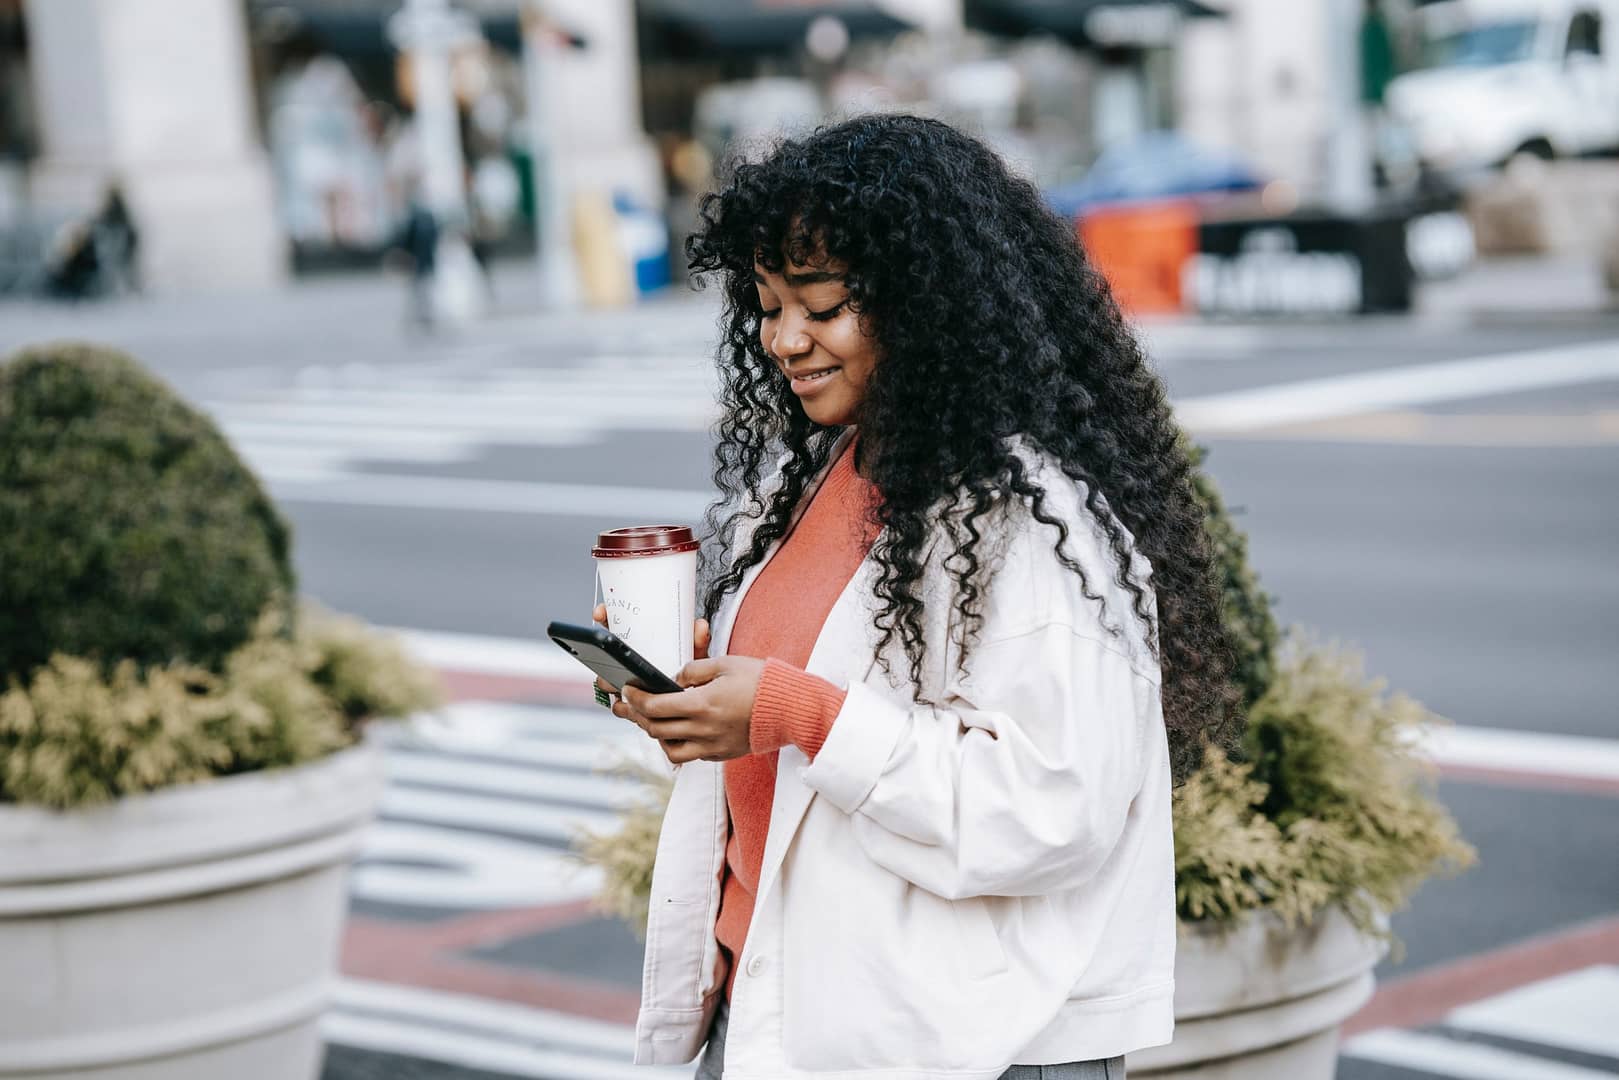 Girl walking on road holding a coffee and mobile phone looking at church mobile app